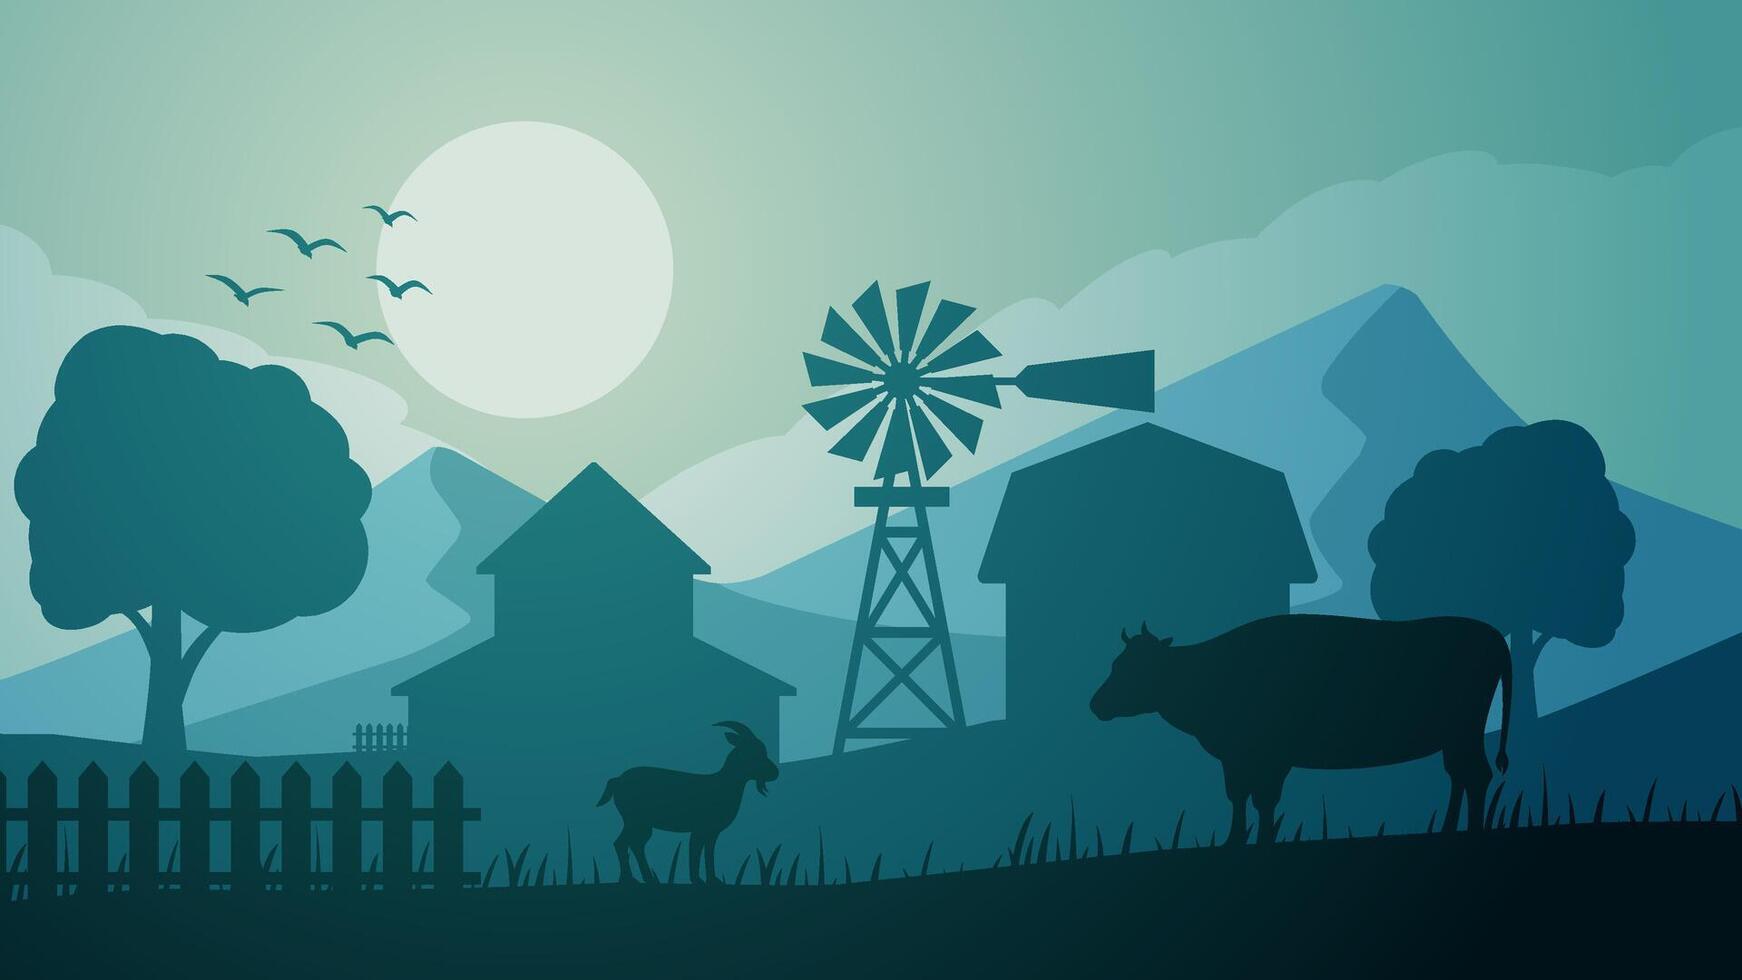 Farmland silhouette landscape vector illustration. Scenery of livestock cow and goat in the countryside farm. Rural landscape for illustration, background or wallpaper